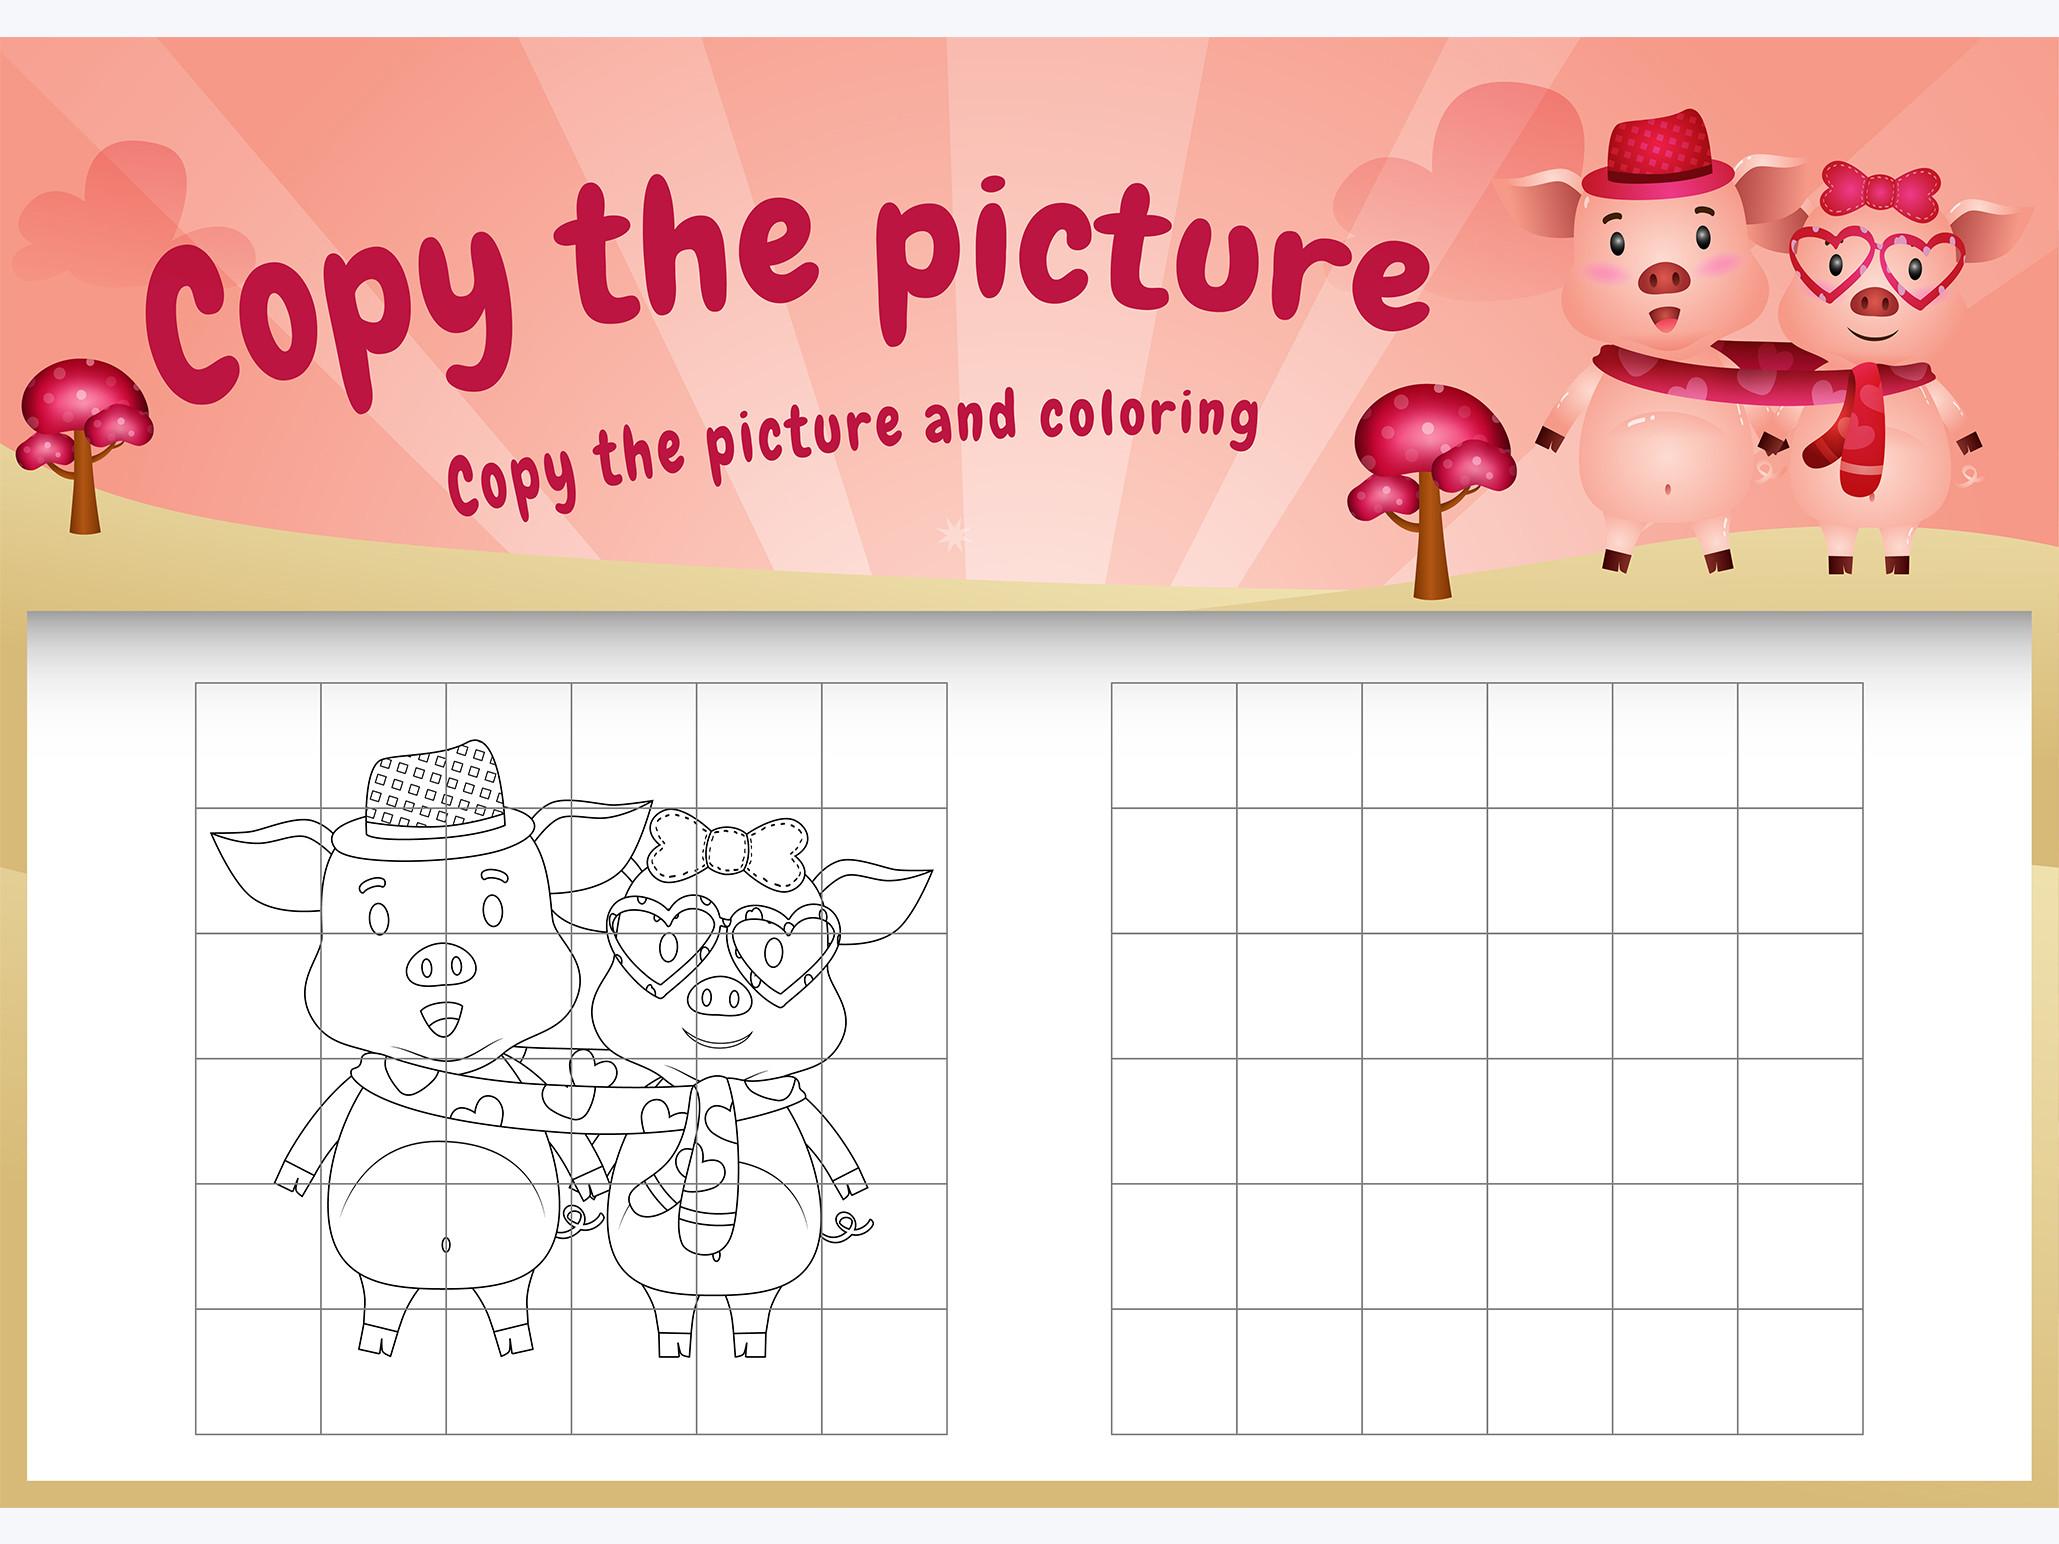 A Pig Valentine - Copy the Picture